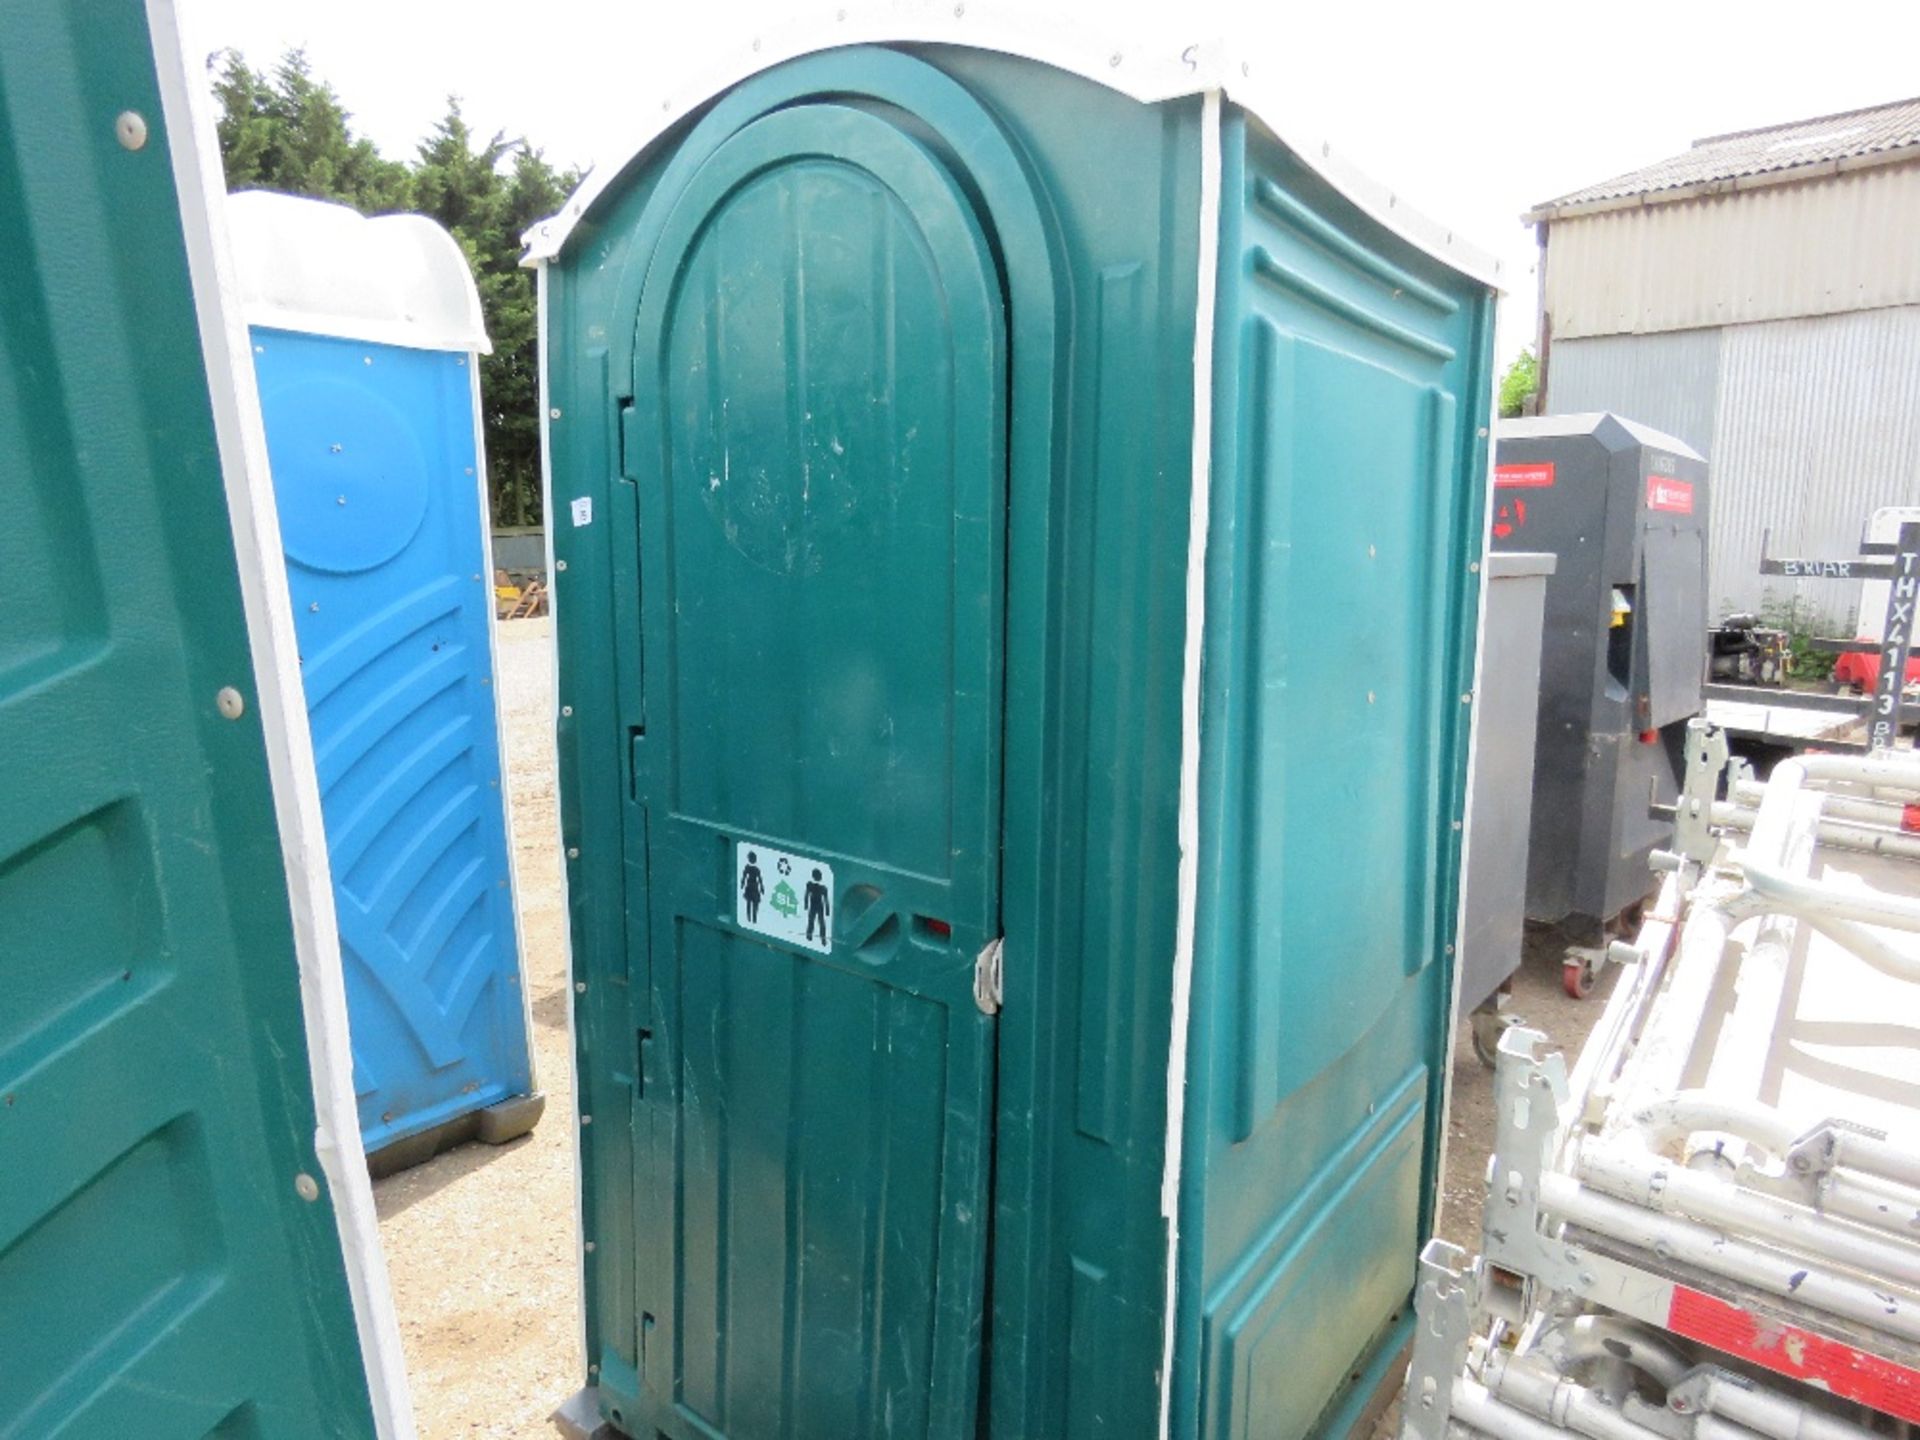 PORTABLE SITE / EVENTS TOILET, DIRECT FROM EVENTS COMPANY DUE TO ONGOING REPLACEMENT PRGRAMME. - Image 3 of 3